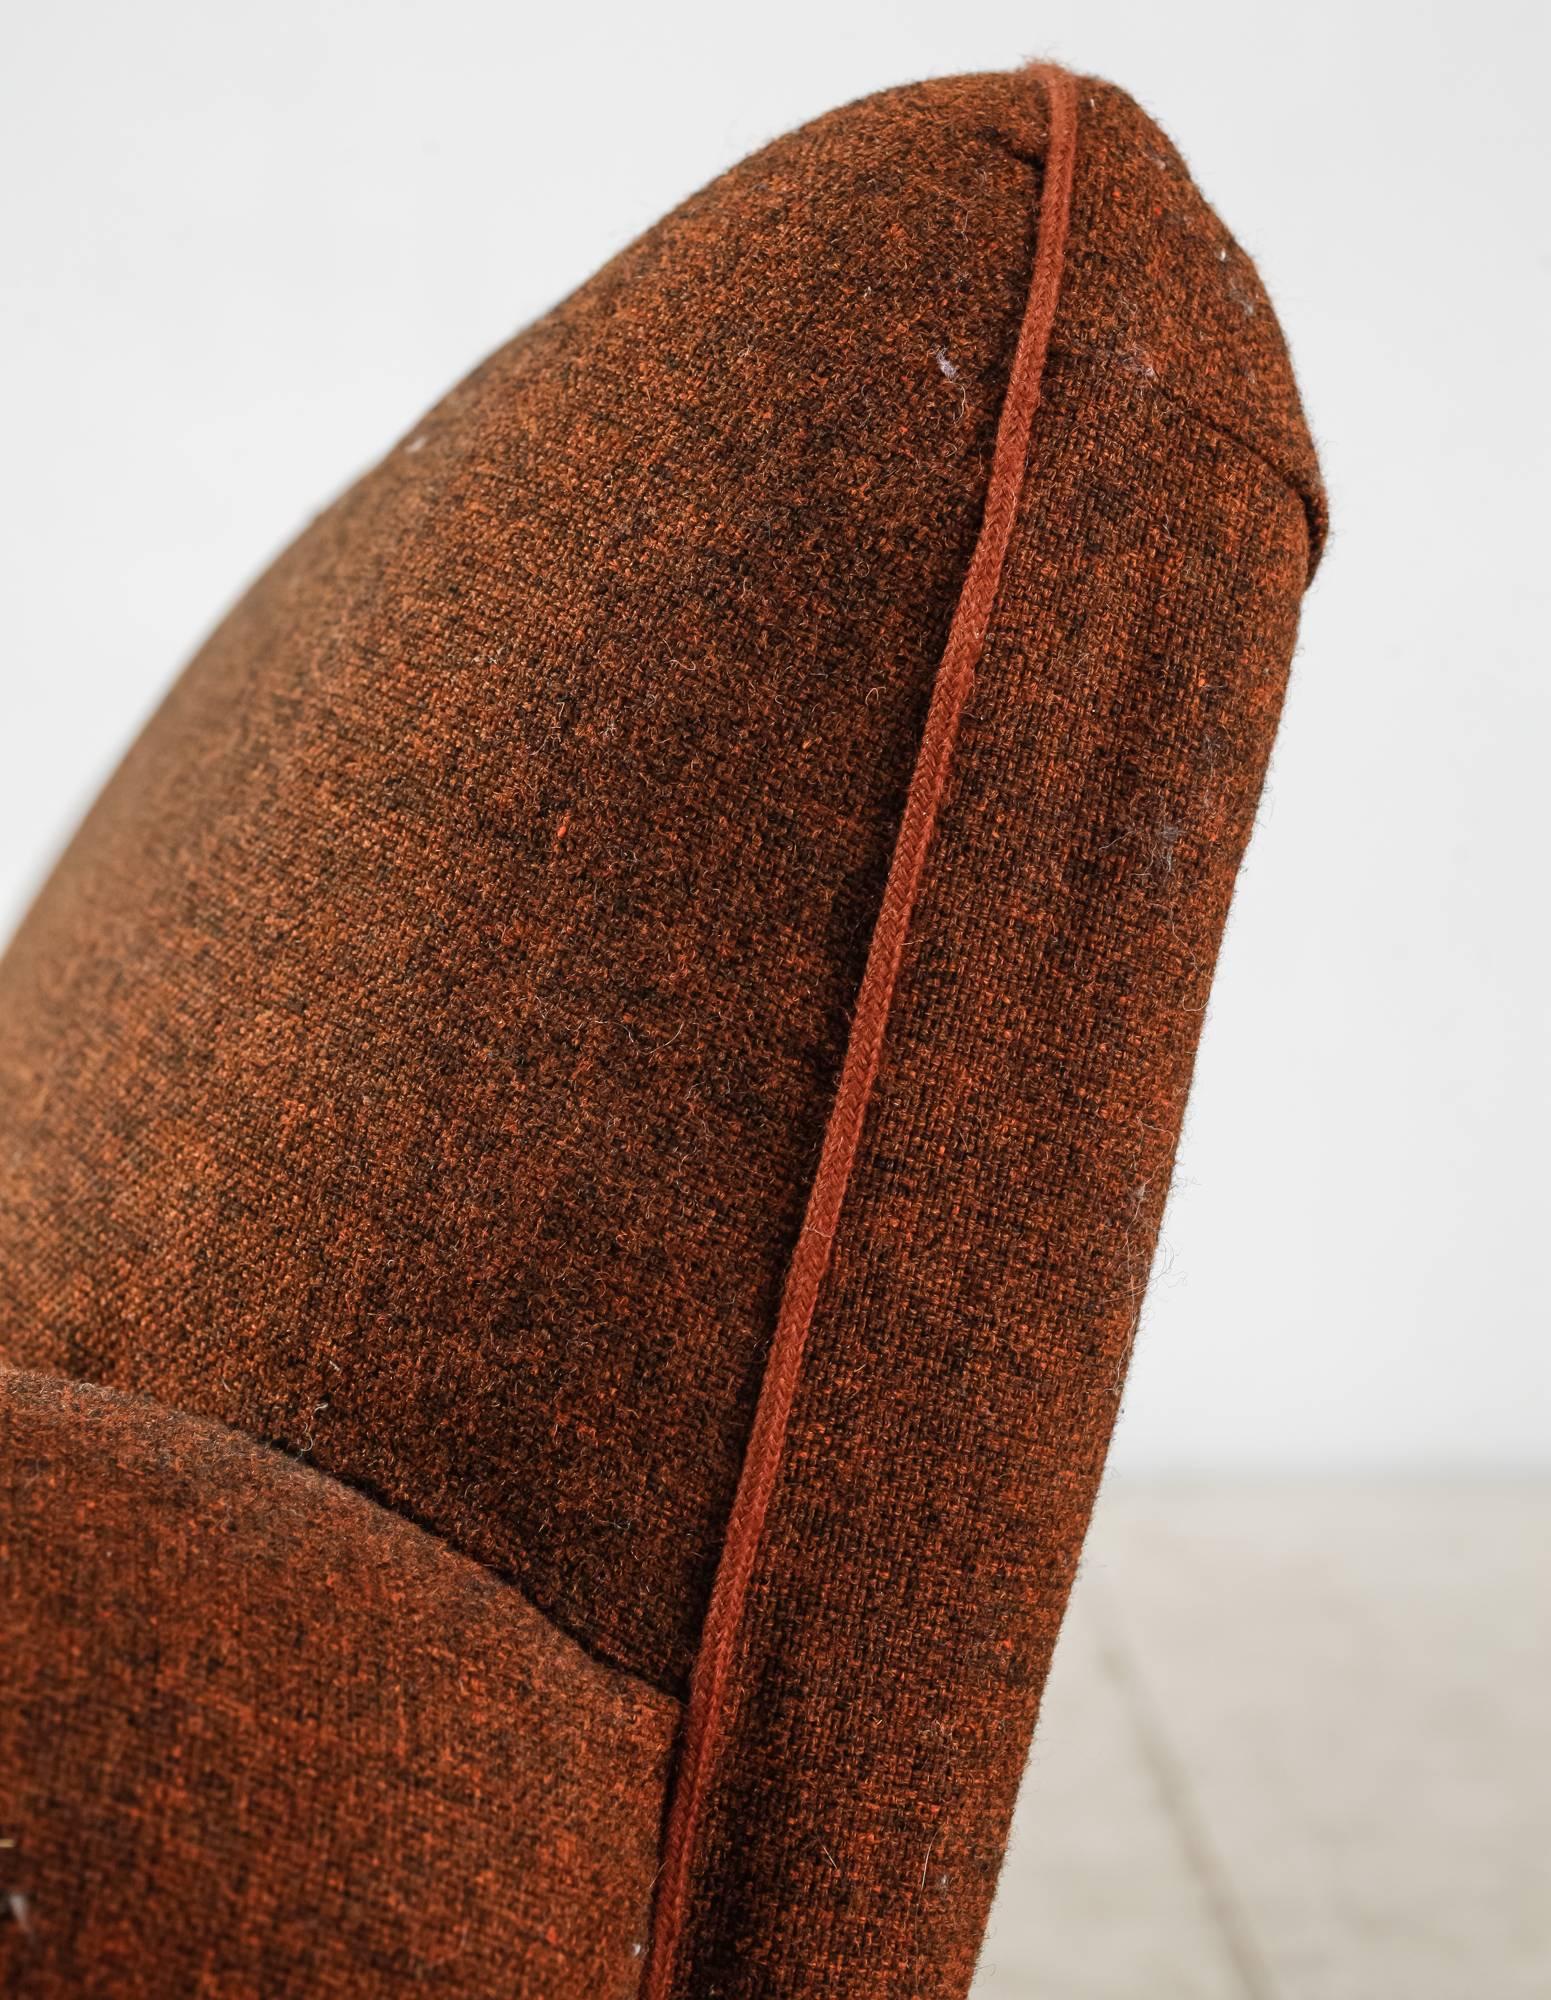 Danish Rounded Three-Seat Sofa with Brown Wool Upholstery, 1940s For Sale 2